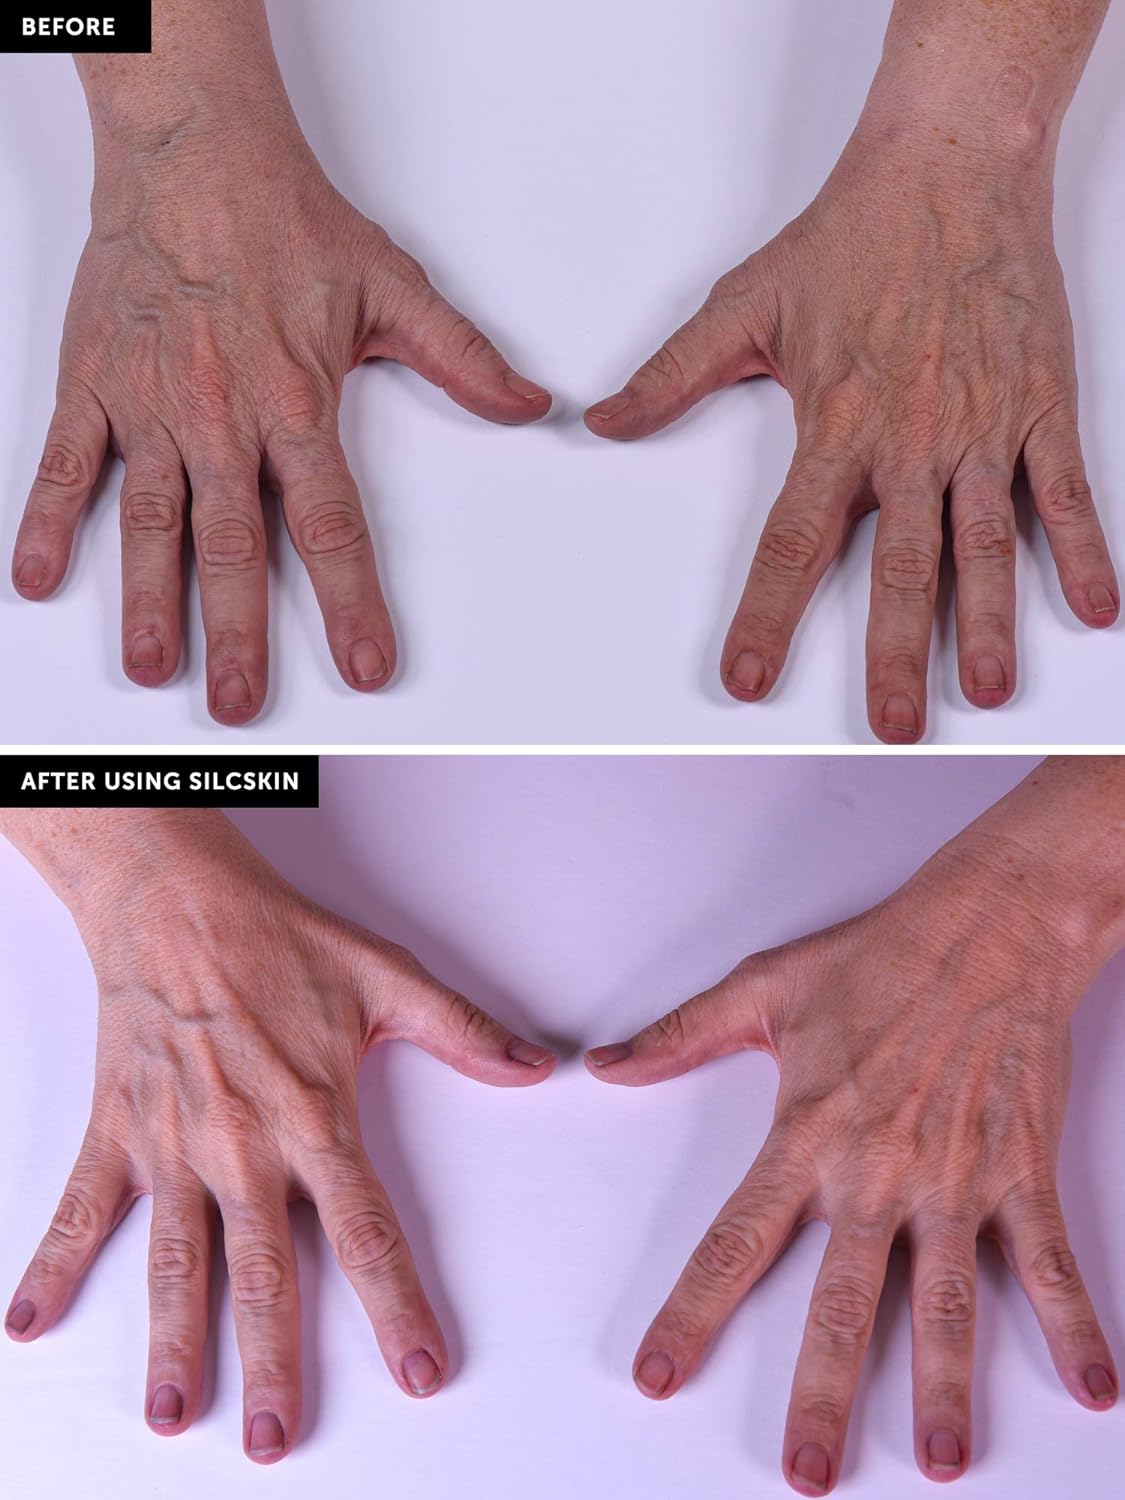 SilcSkin Hand & Body Treatment - Uses Medical Grade Silicone